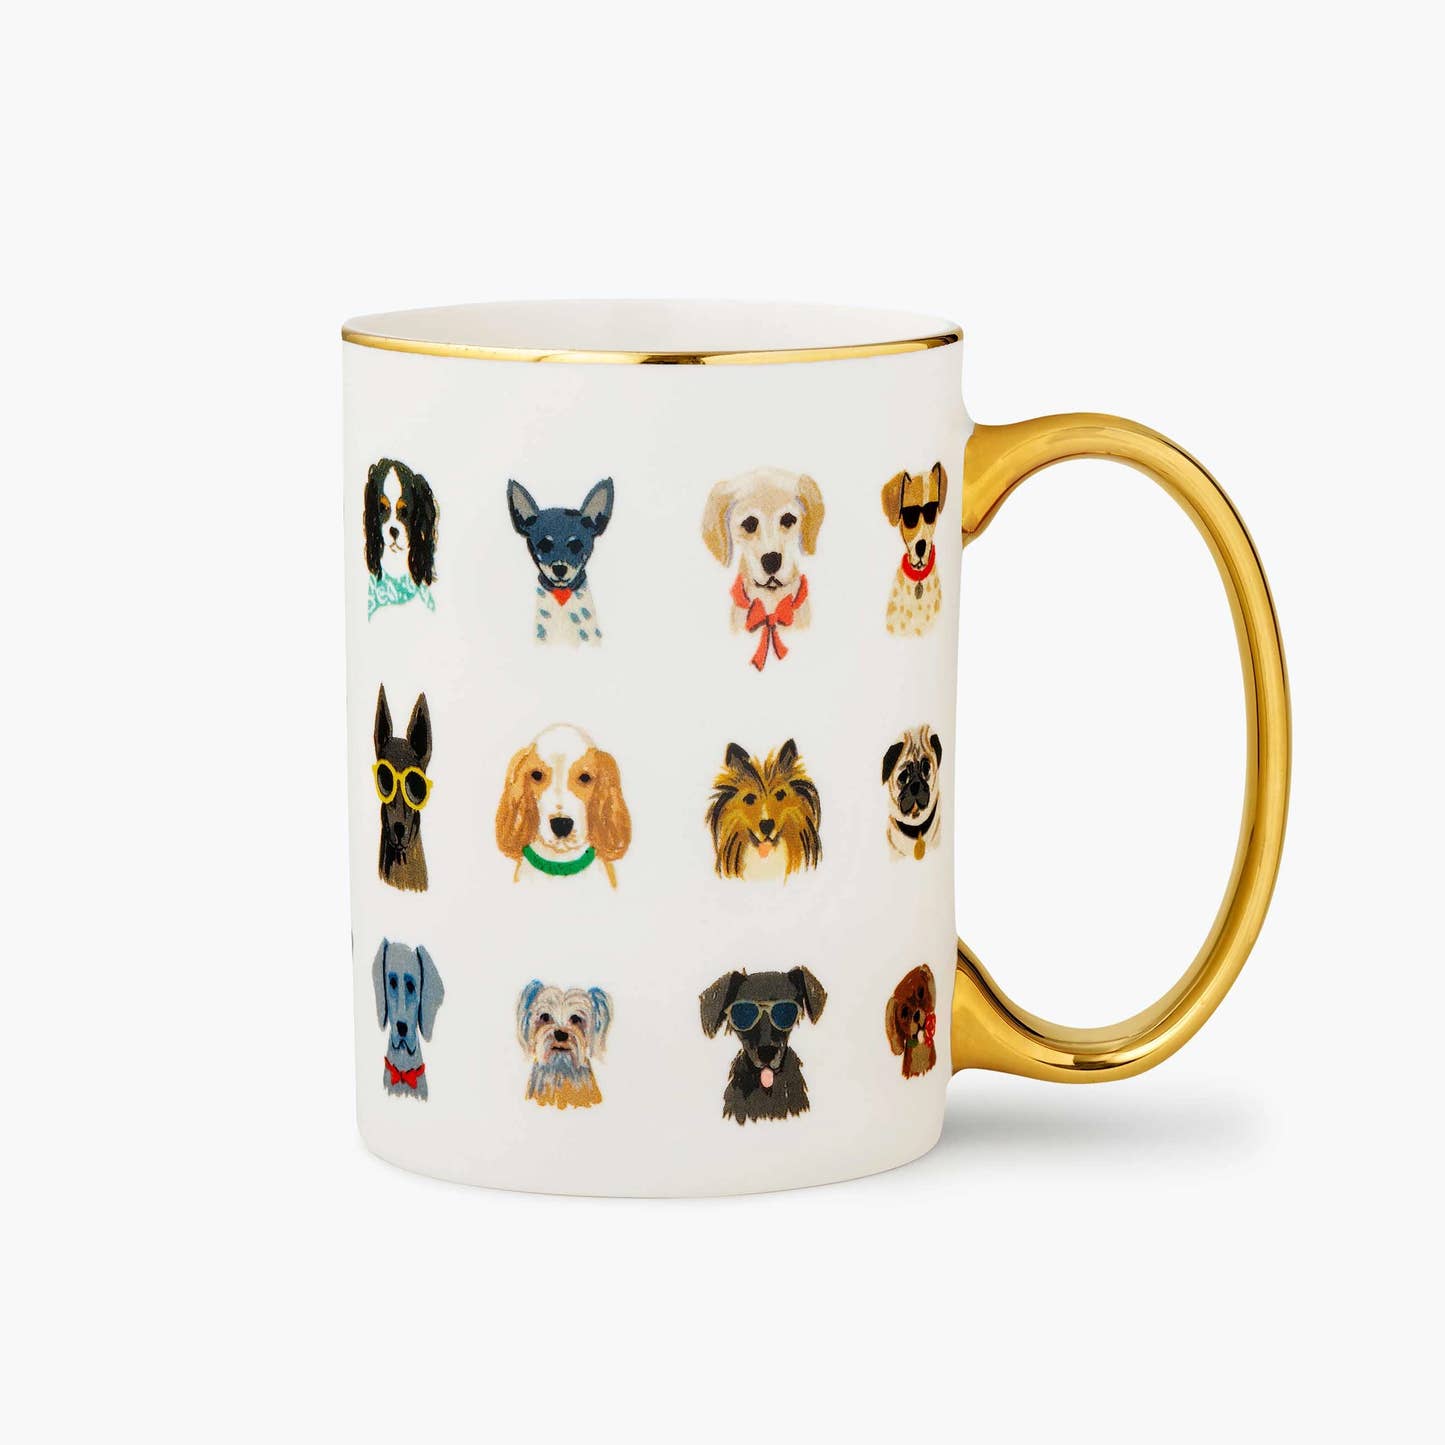 Dogs Porcelain Mug by Rifle Paper Co illustrated with various dogs wearing accessories and a gold handle